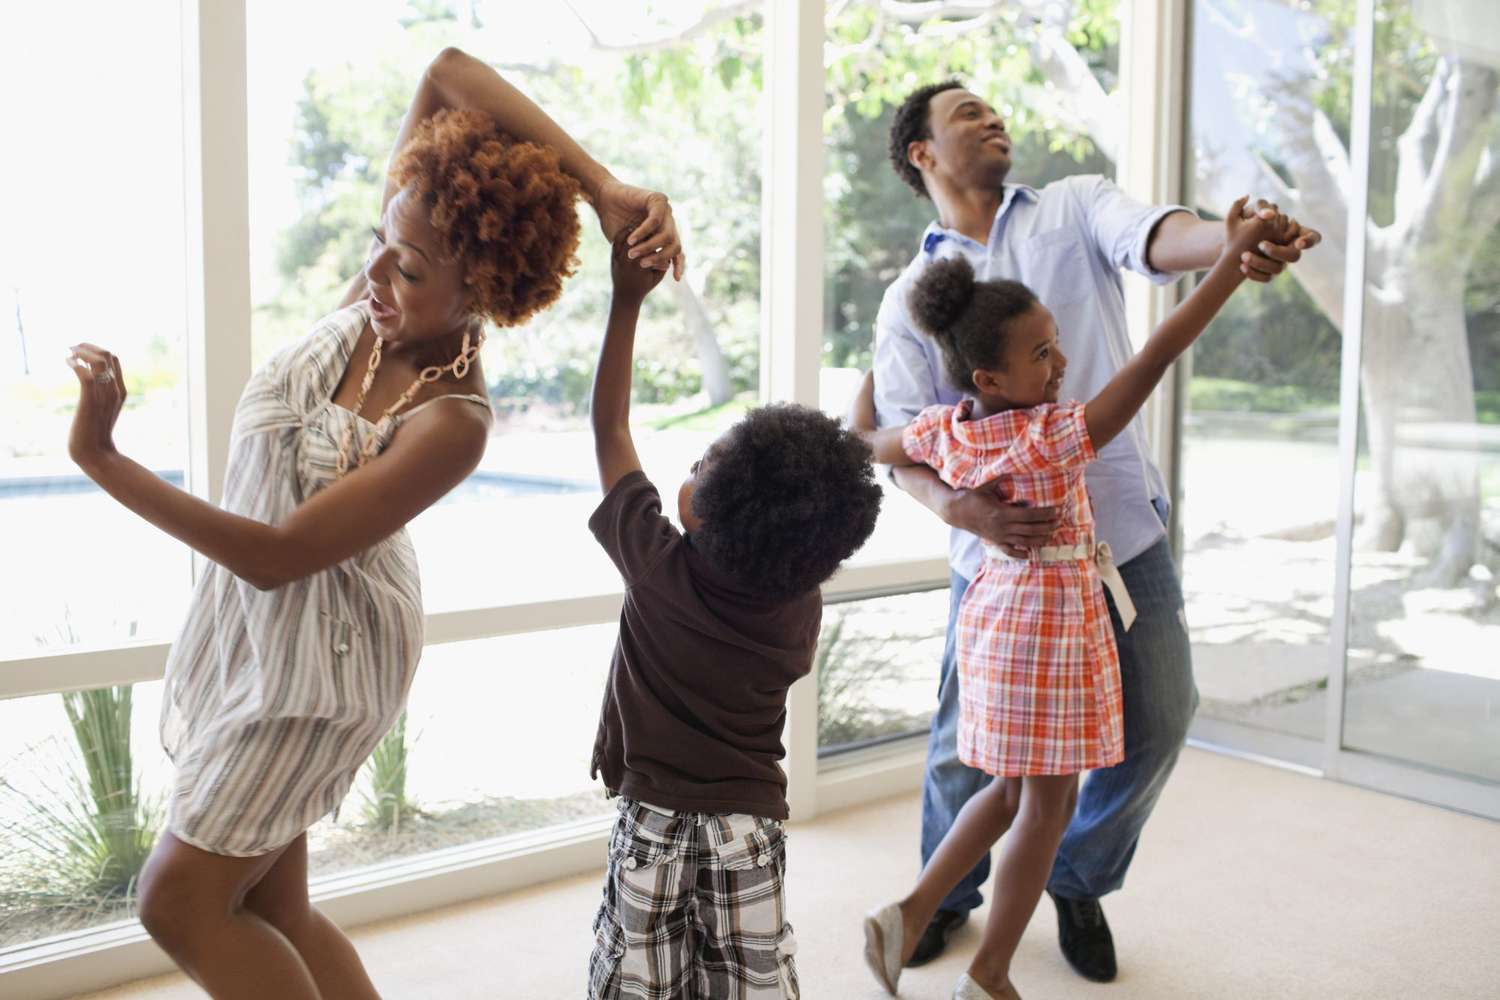 dancing pain free with the family after taking CBD Wellness capsules